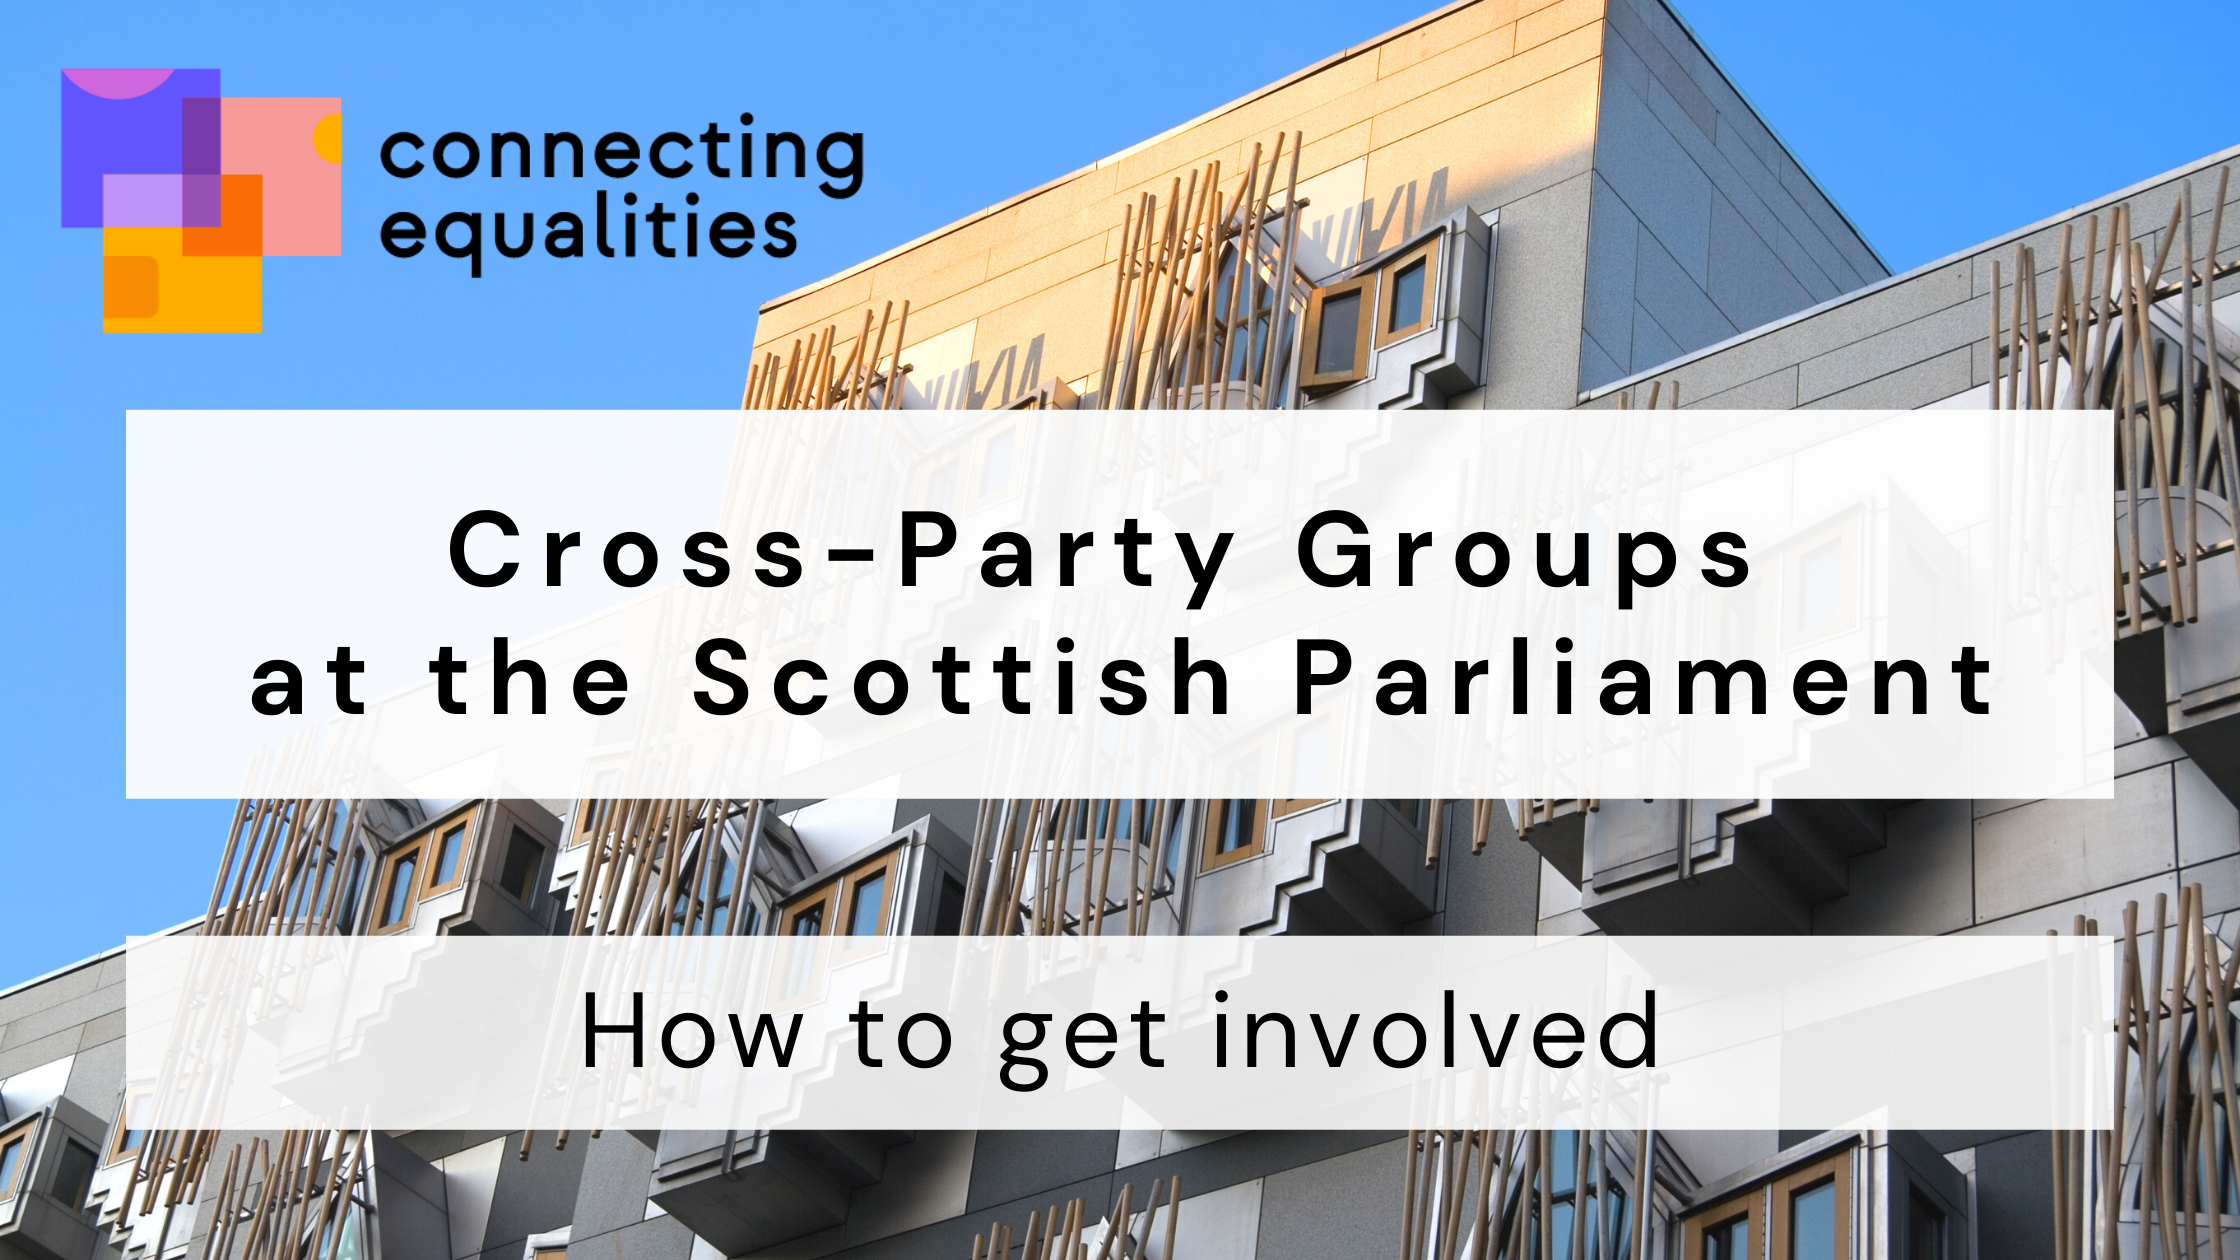 Cross-party groups at the Scottish Parliament. How to get involved